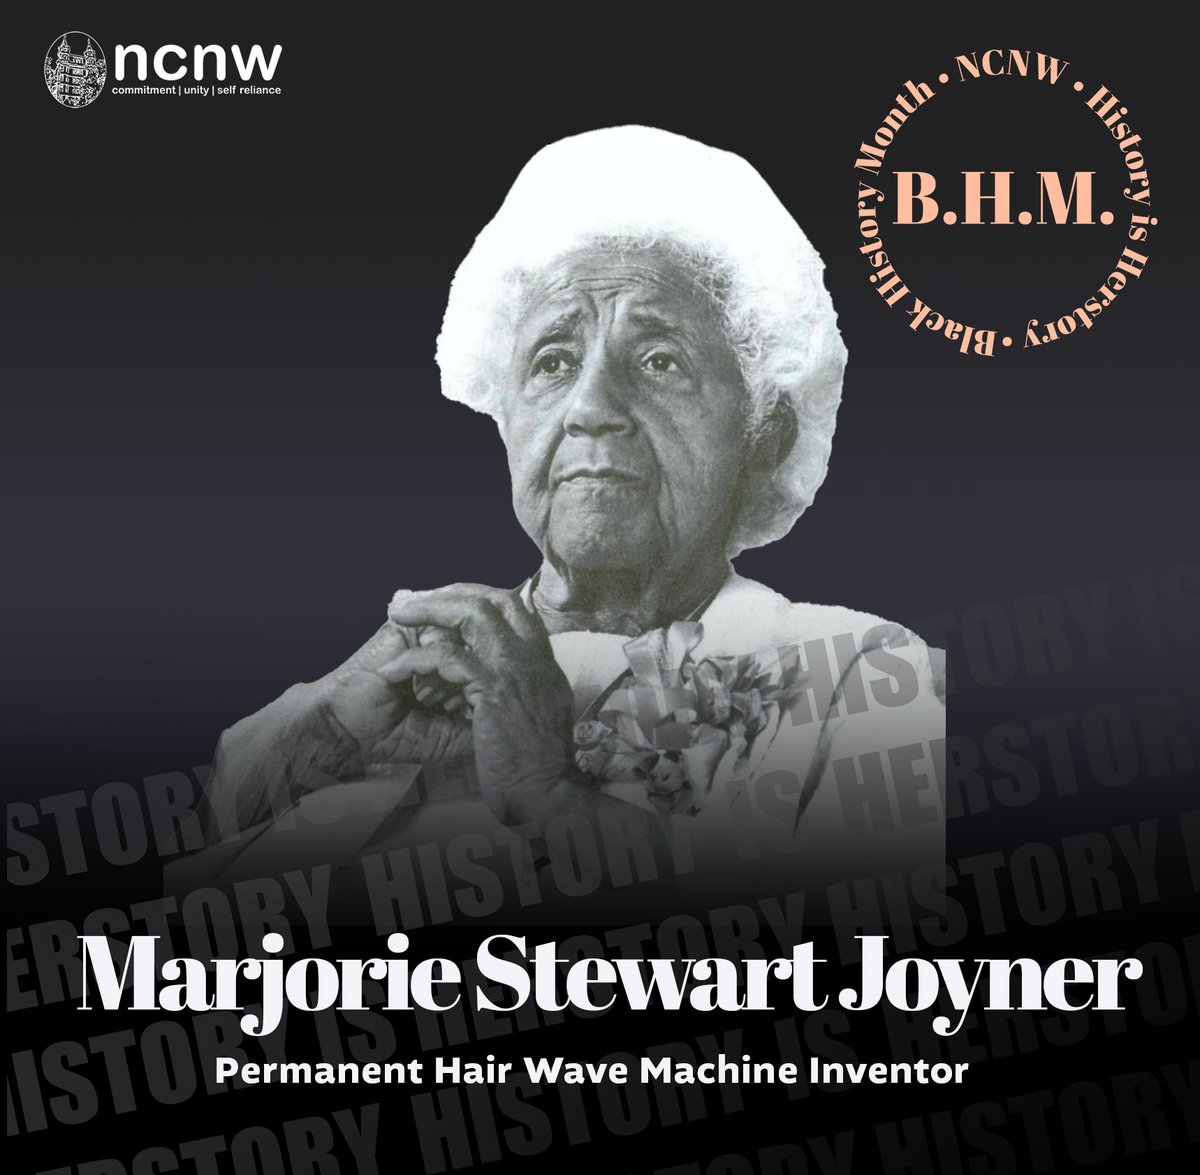 Majorie Stewart Joyner invented a permanent wave machine that added curl to straight hair and could be used to straighten curly hair. She became a national supervisor for Madam CJ Walker's over 200 Beauty Schools. (Credit: AmericaComesAlive.com) #ncnw #blackhistorymonth